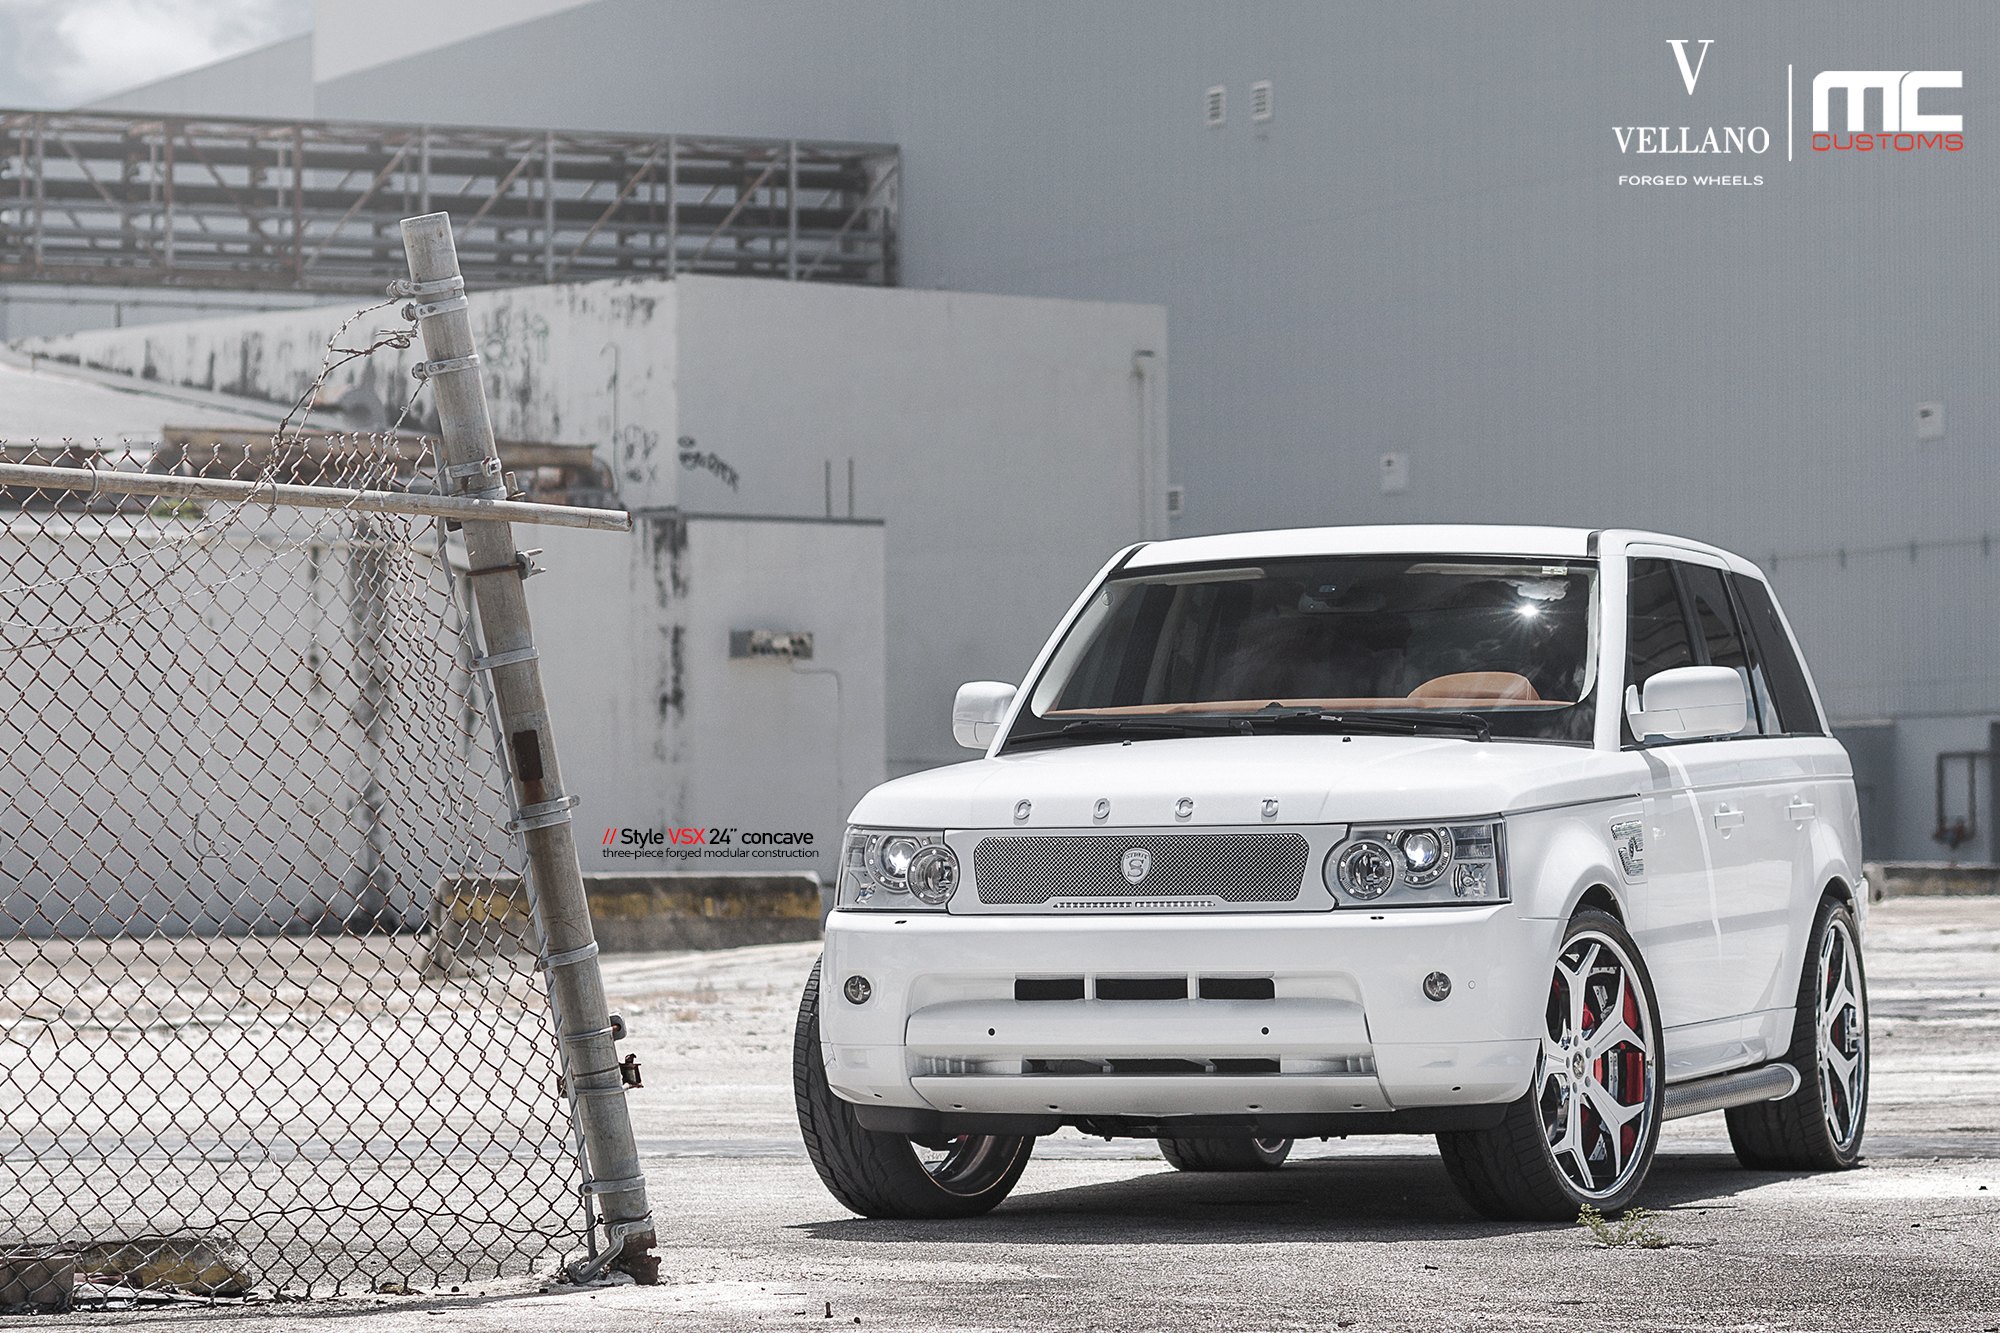 White Range Rover Sport with Chrome Mesh Grille - Photo by Vellano